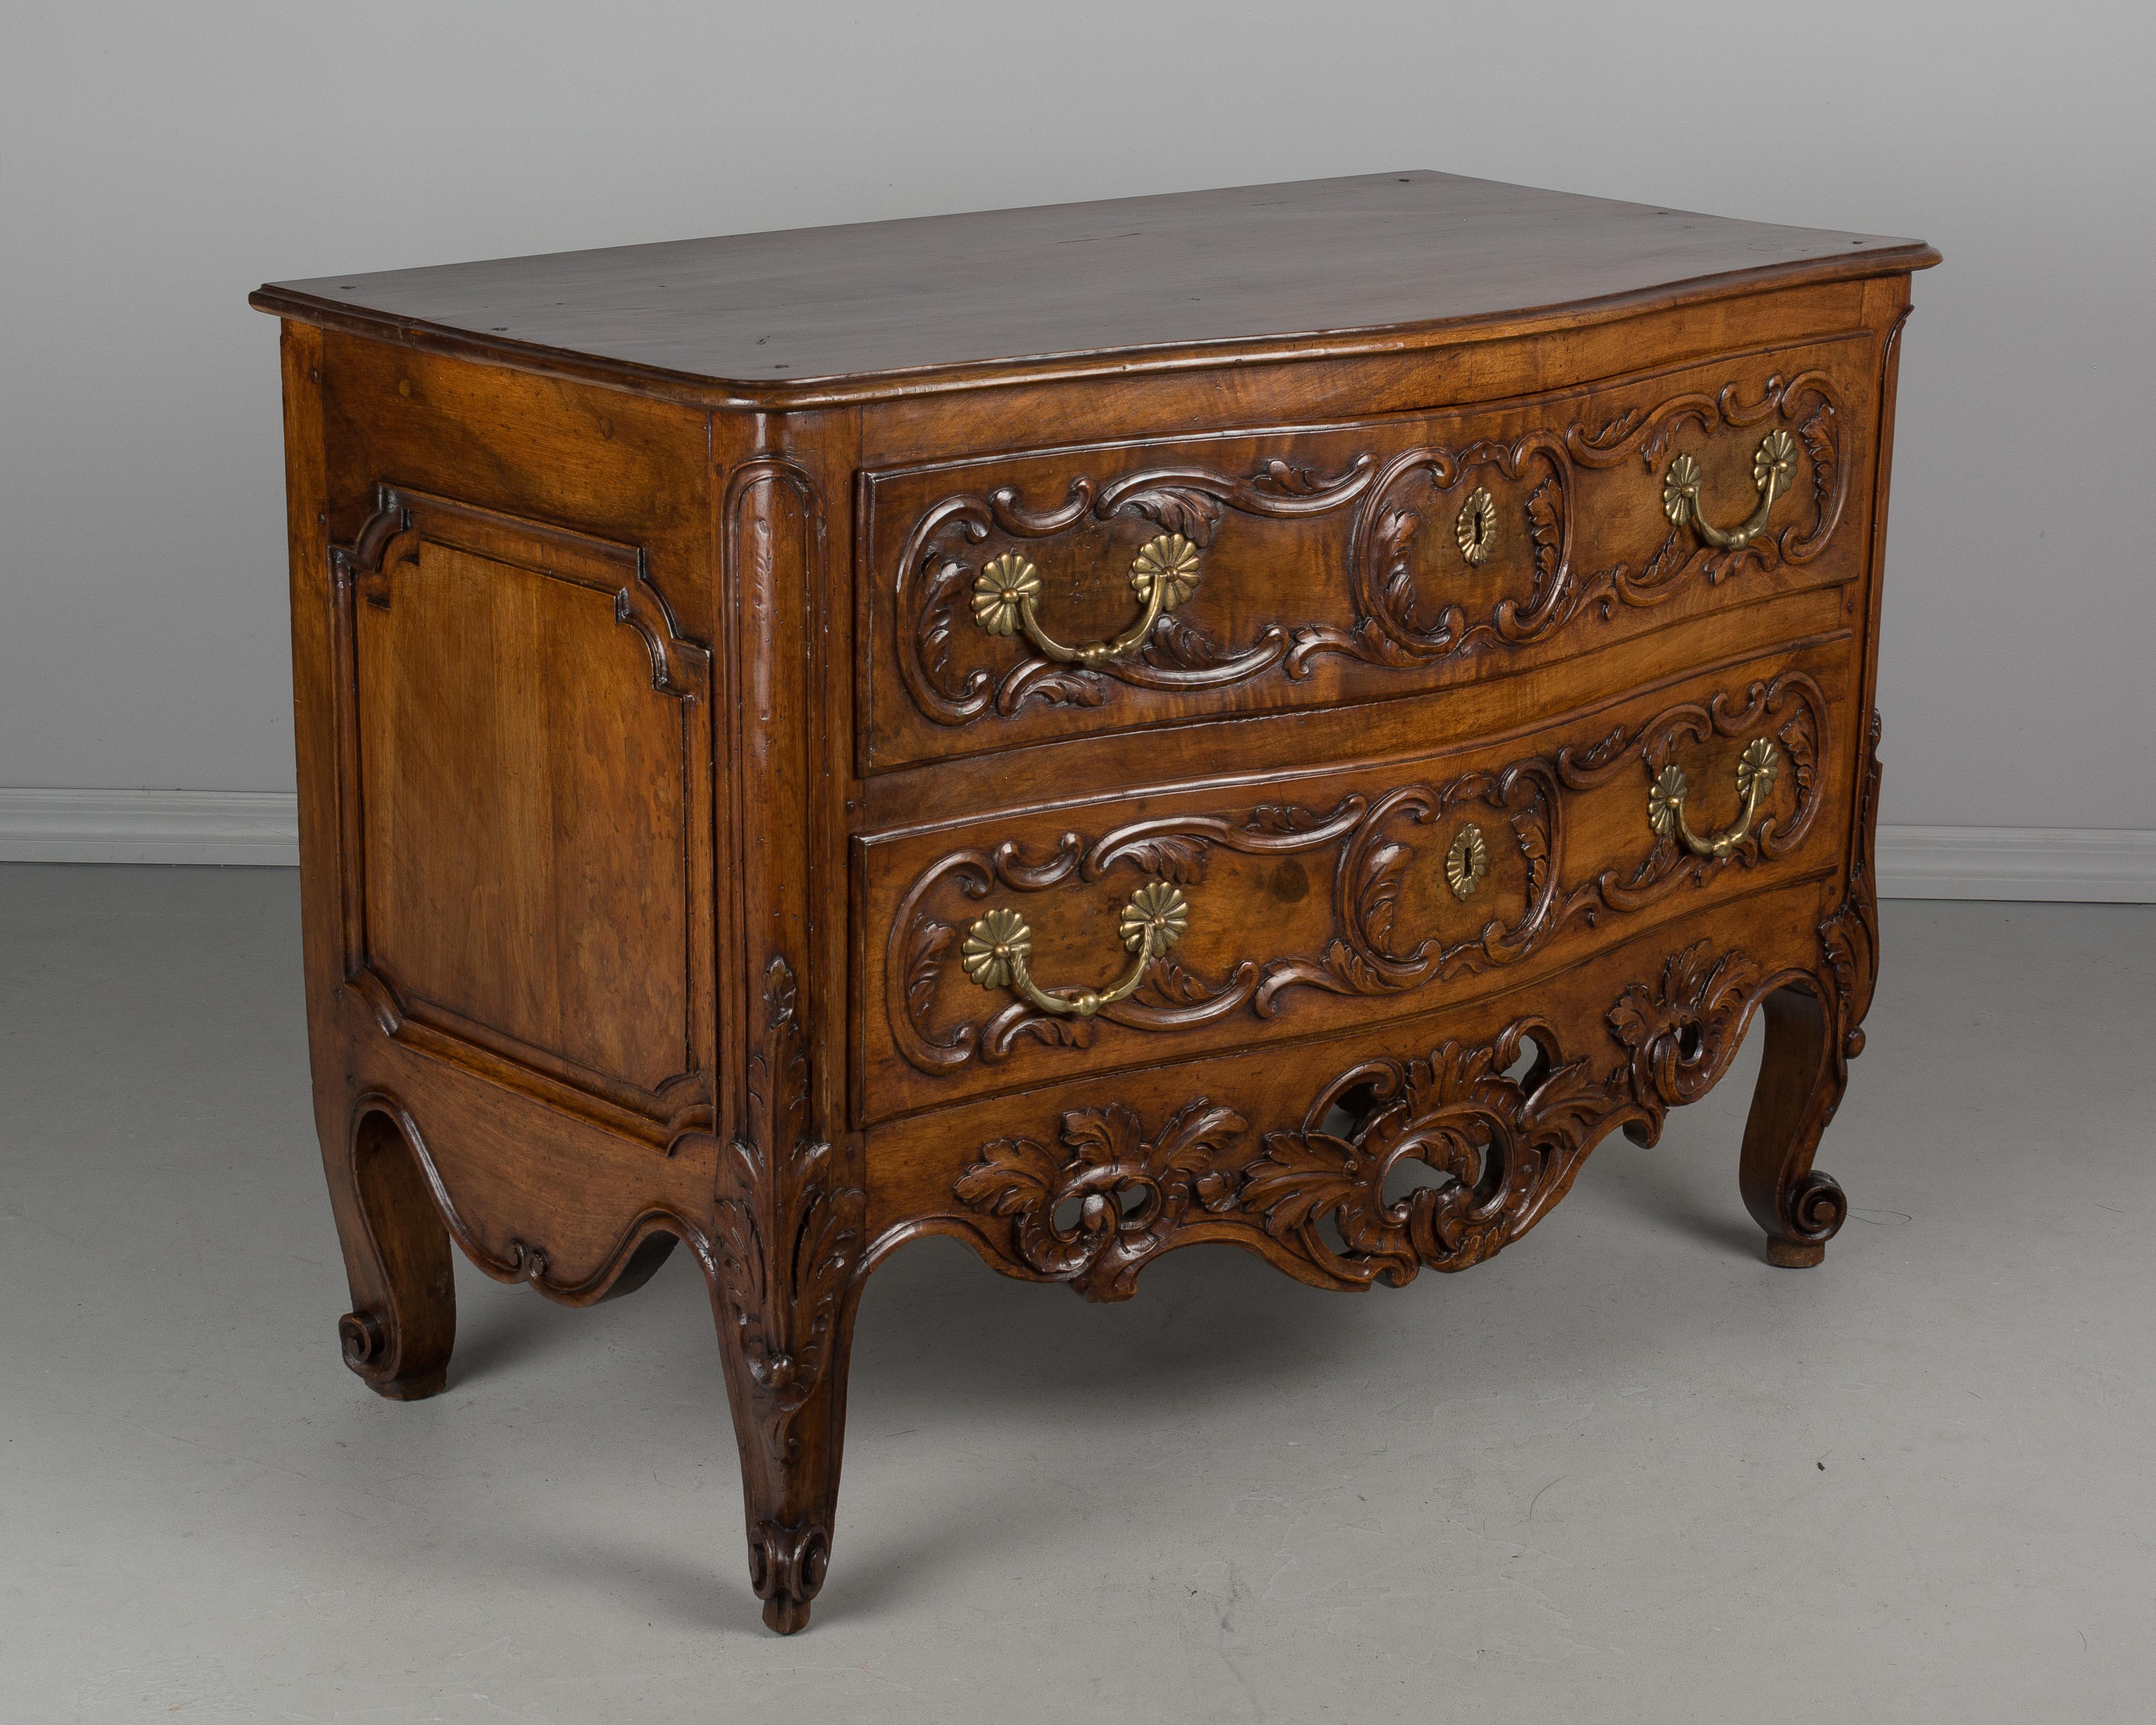 European French 18th Century Louis XV Period Commode or Chest of Drawers For Sale